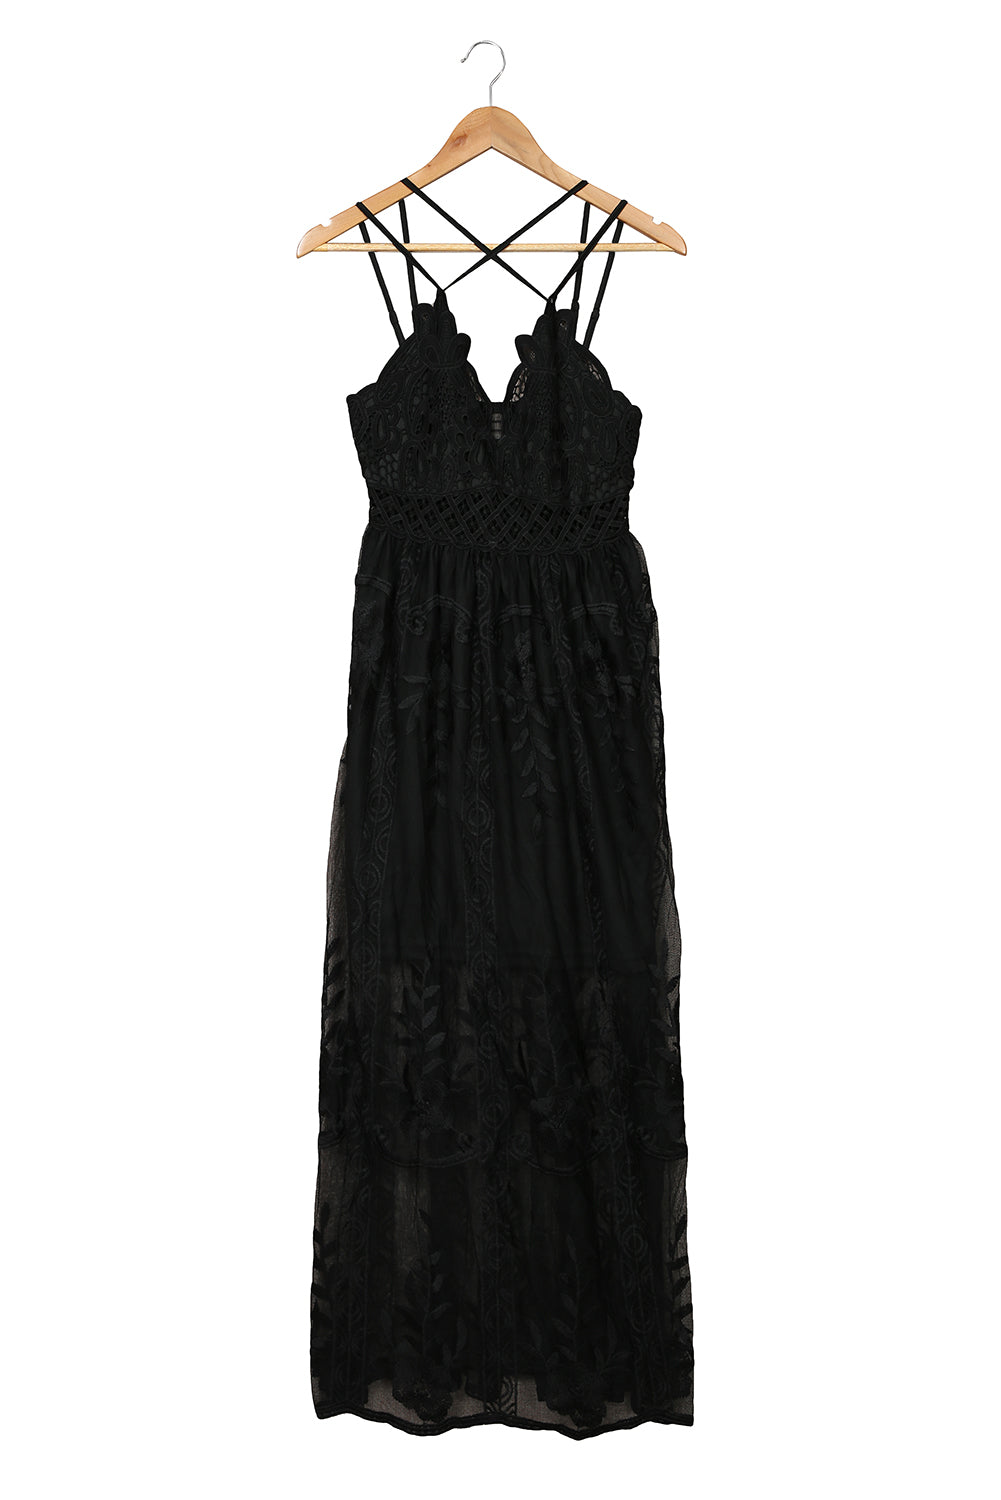 Black White Maxi Dress Lace Crisscross Backless Cocktail Party Maxi Long Dress LC619278-2